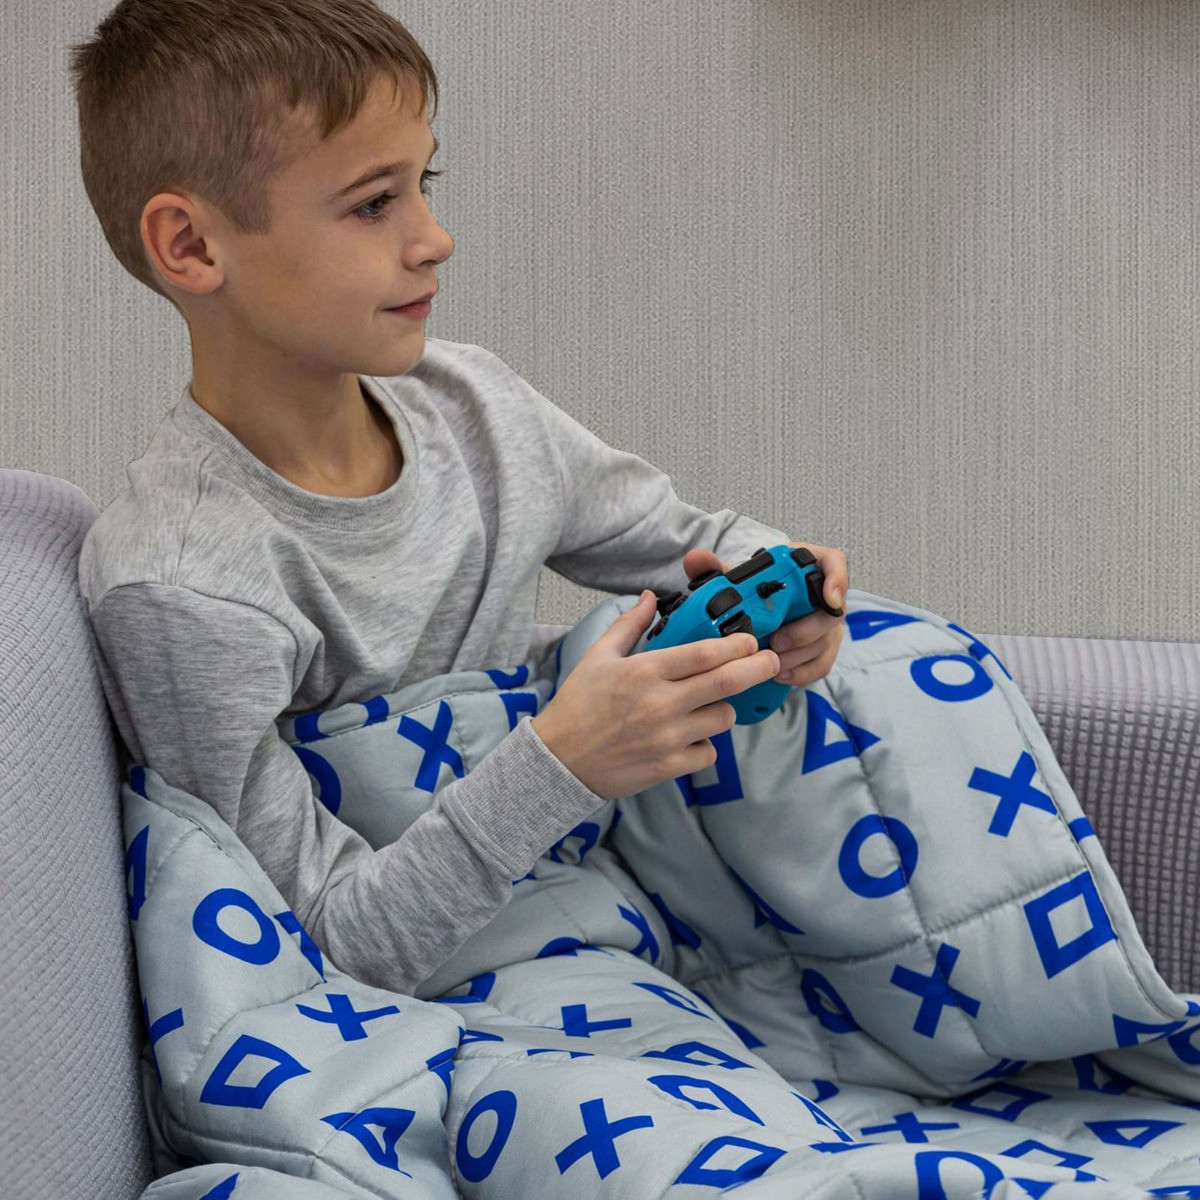 Playstation Weighted Blanket, Grey - 3kg>